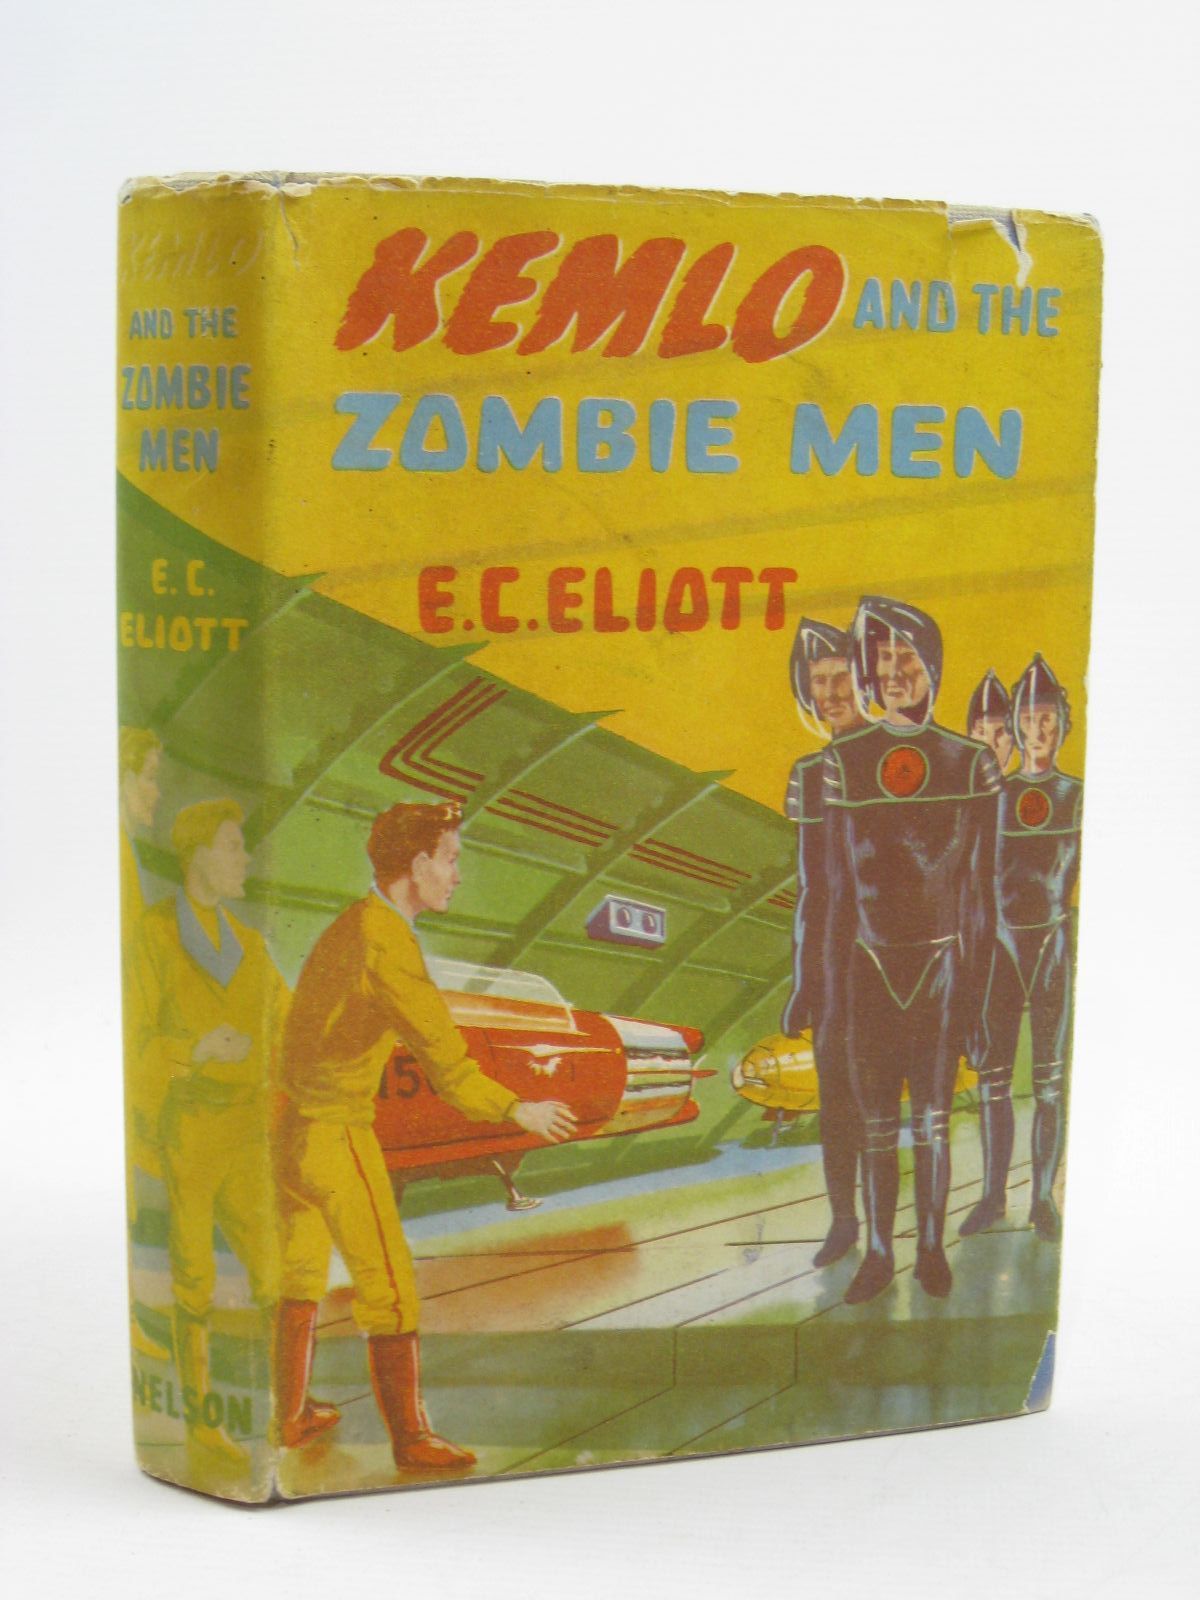 Cover of KEMLO AND THE ZOMBIE MEN by E.C. Eliott